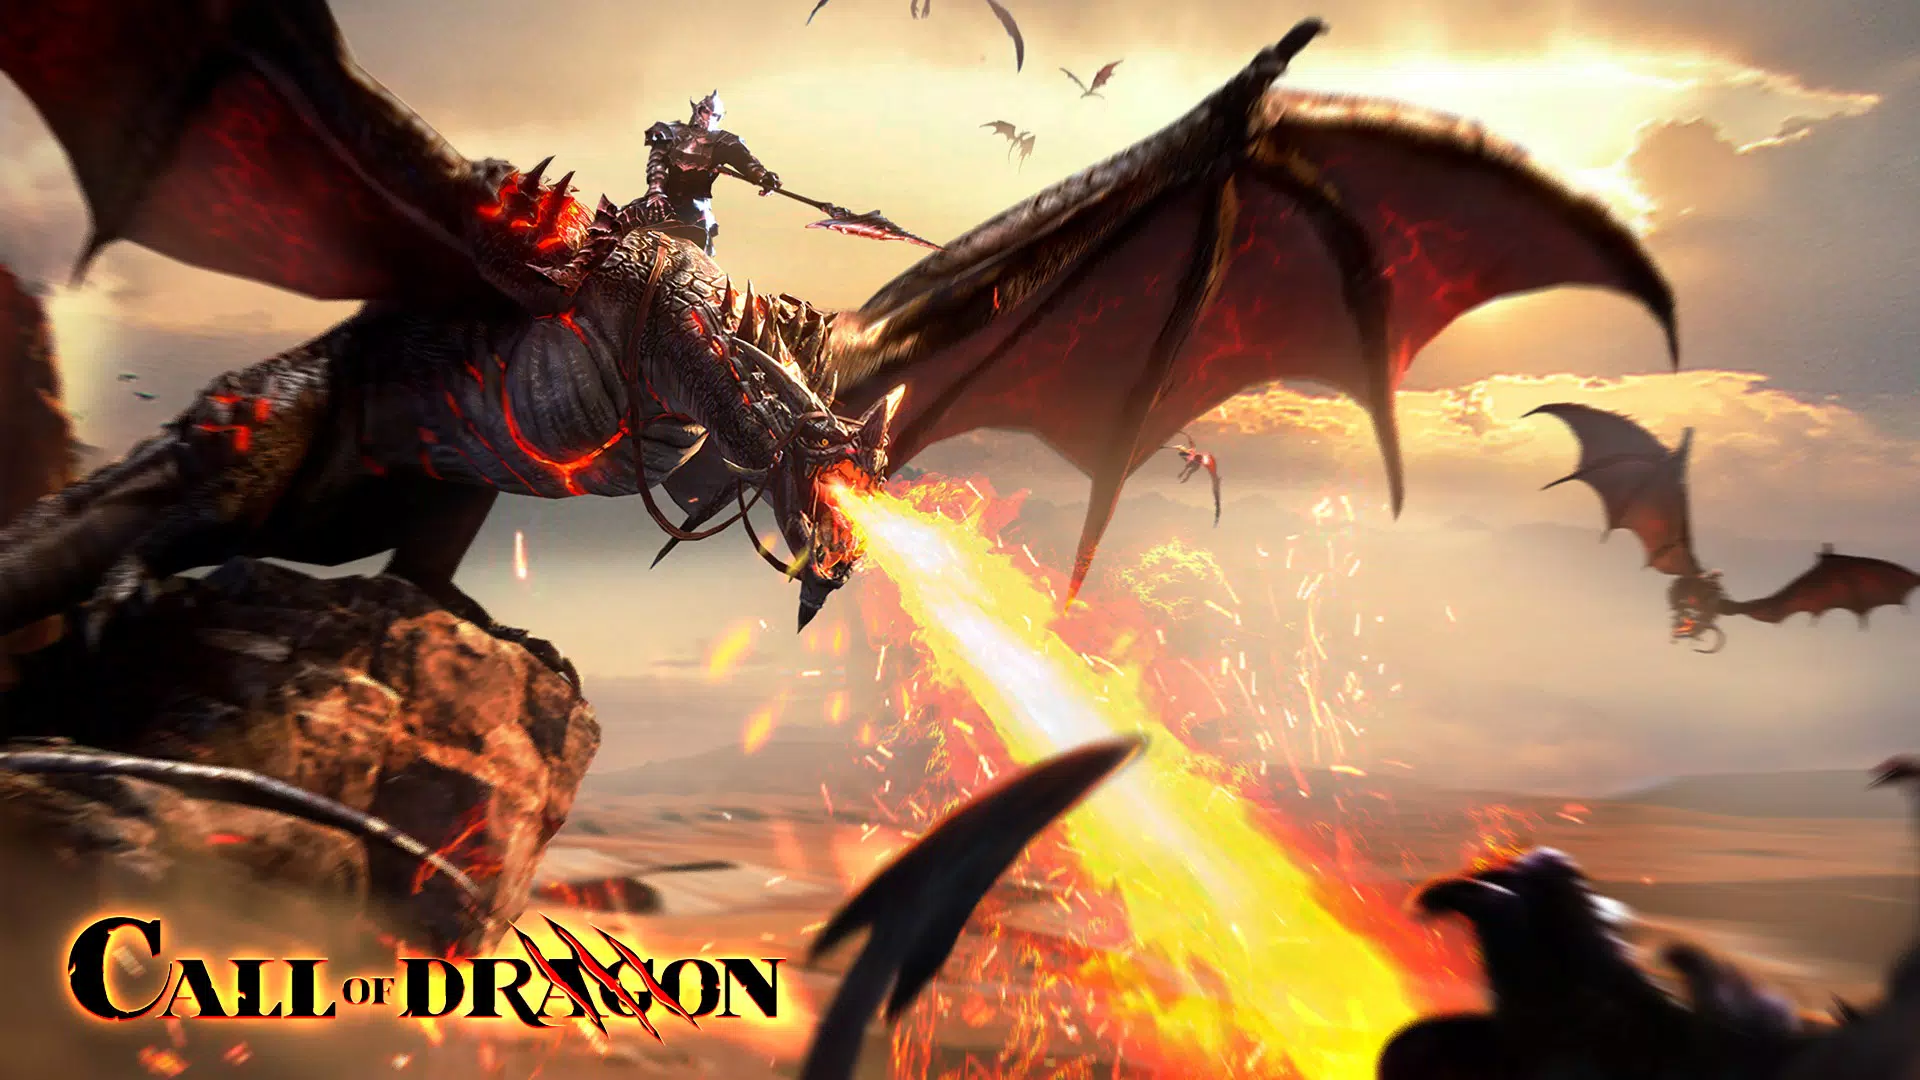 Call of Dragons  Download and Play for Free - Epic Games Store